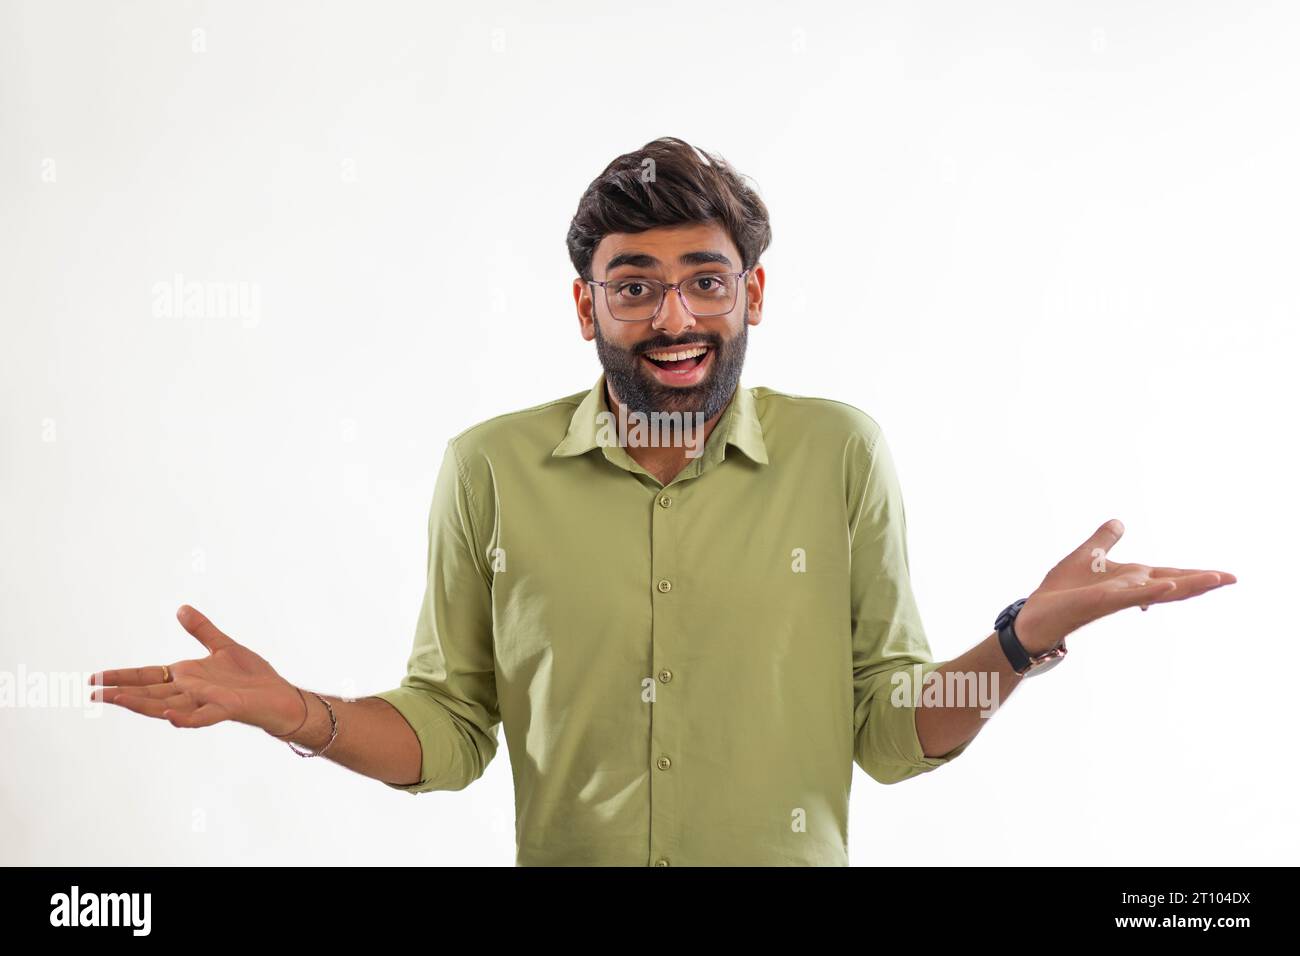 Portrait of a smiling young man gesturing against white background Stock Photo